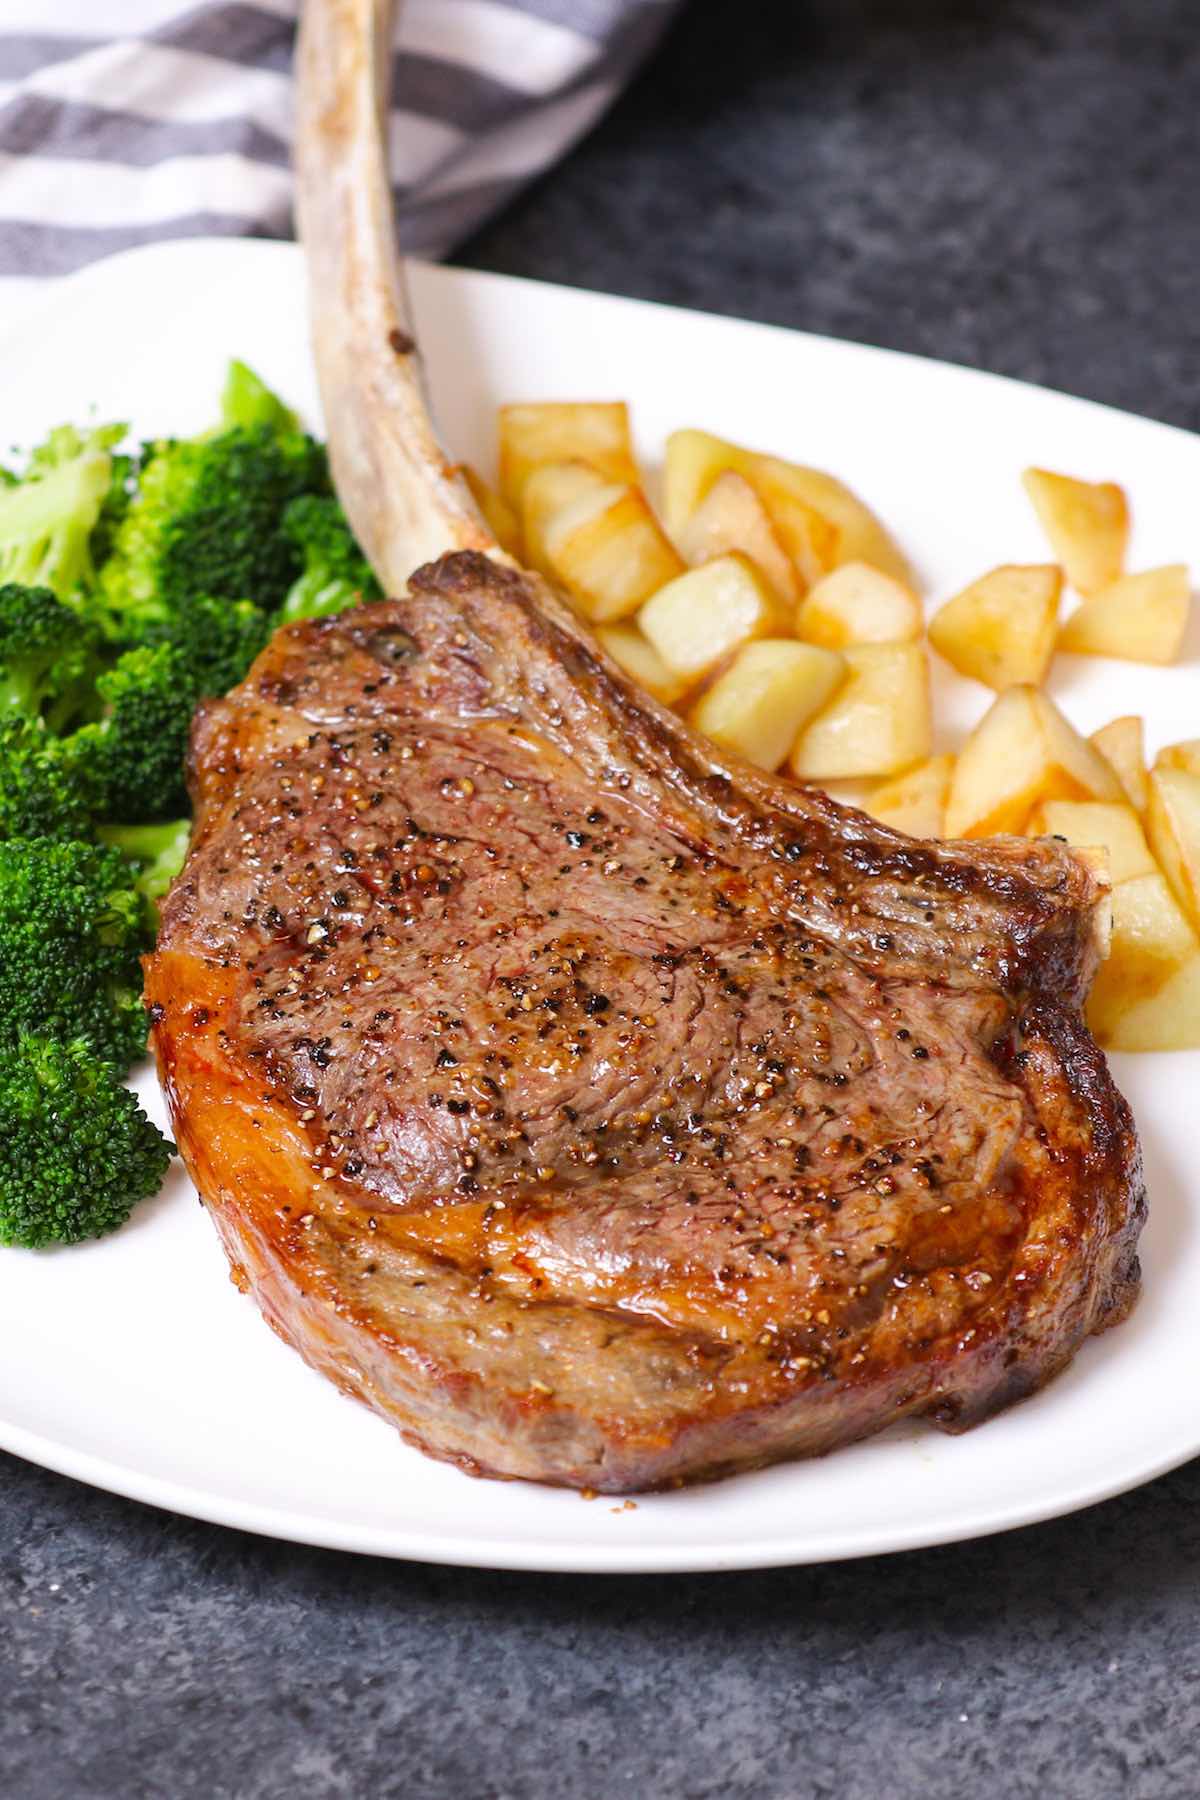 Tomahawk steak on a serving plate with potatoes and broccoli